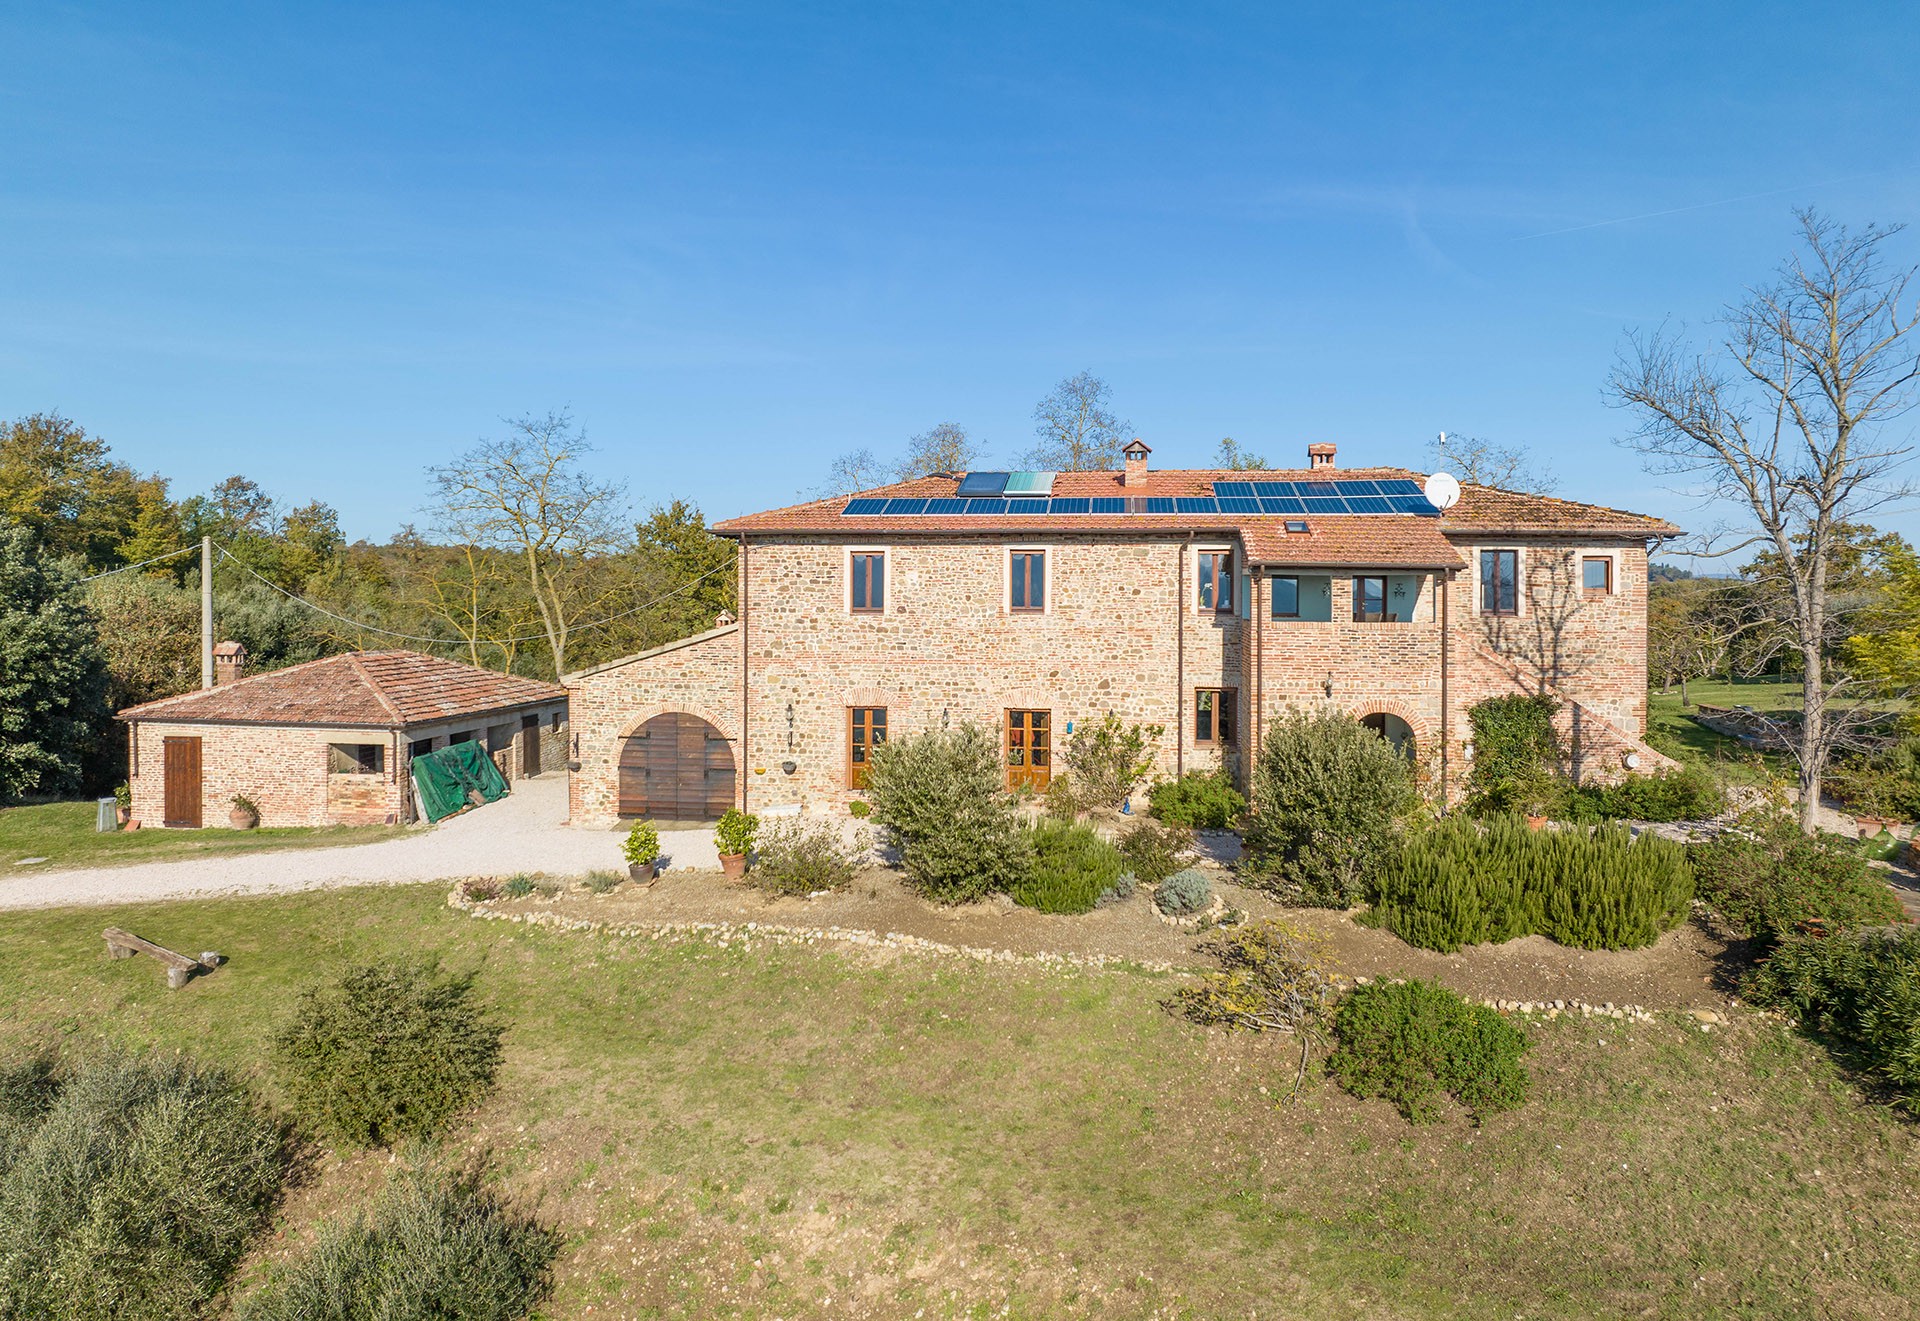 In Italy, Giving a Long Unoccupied Farmhouse a Loving Restoration